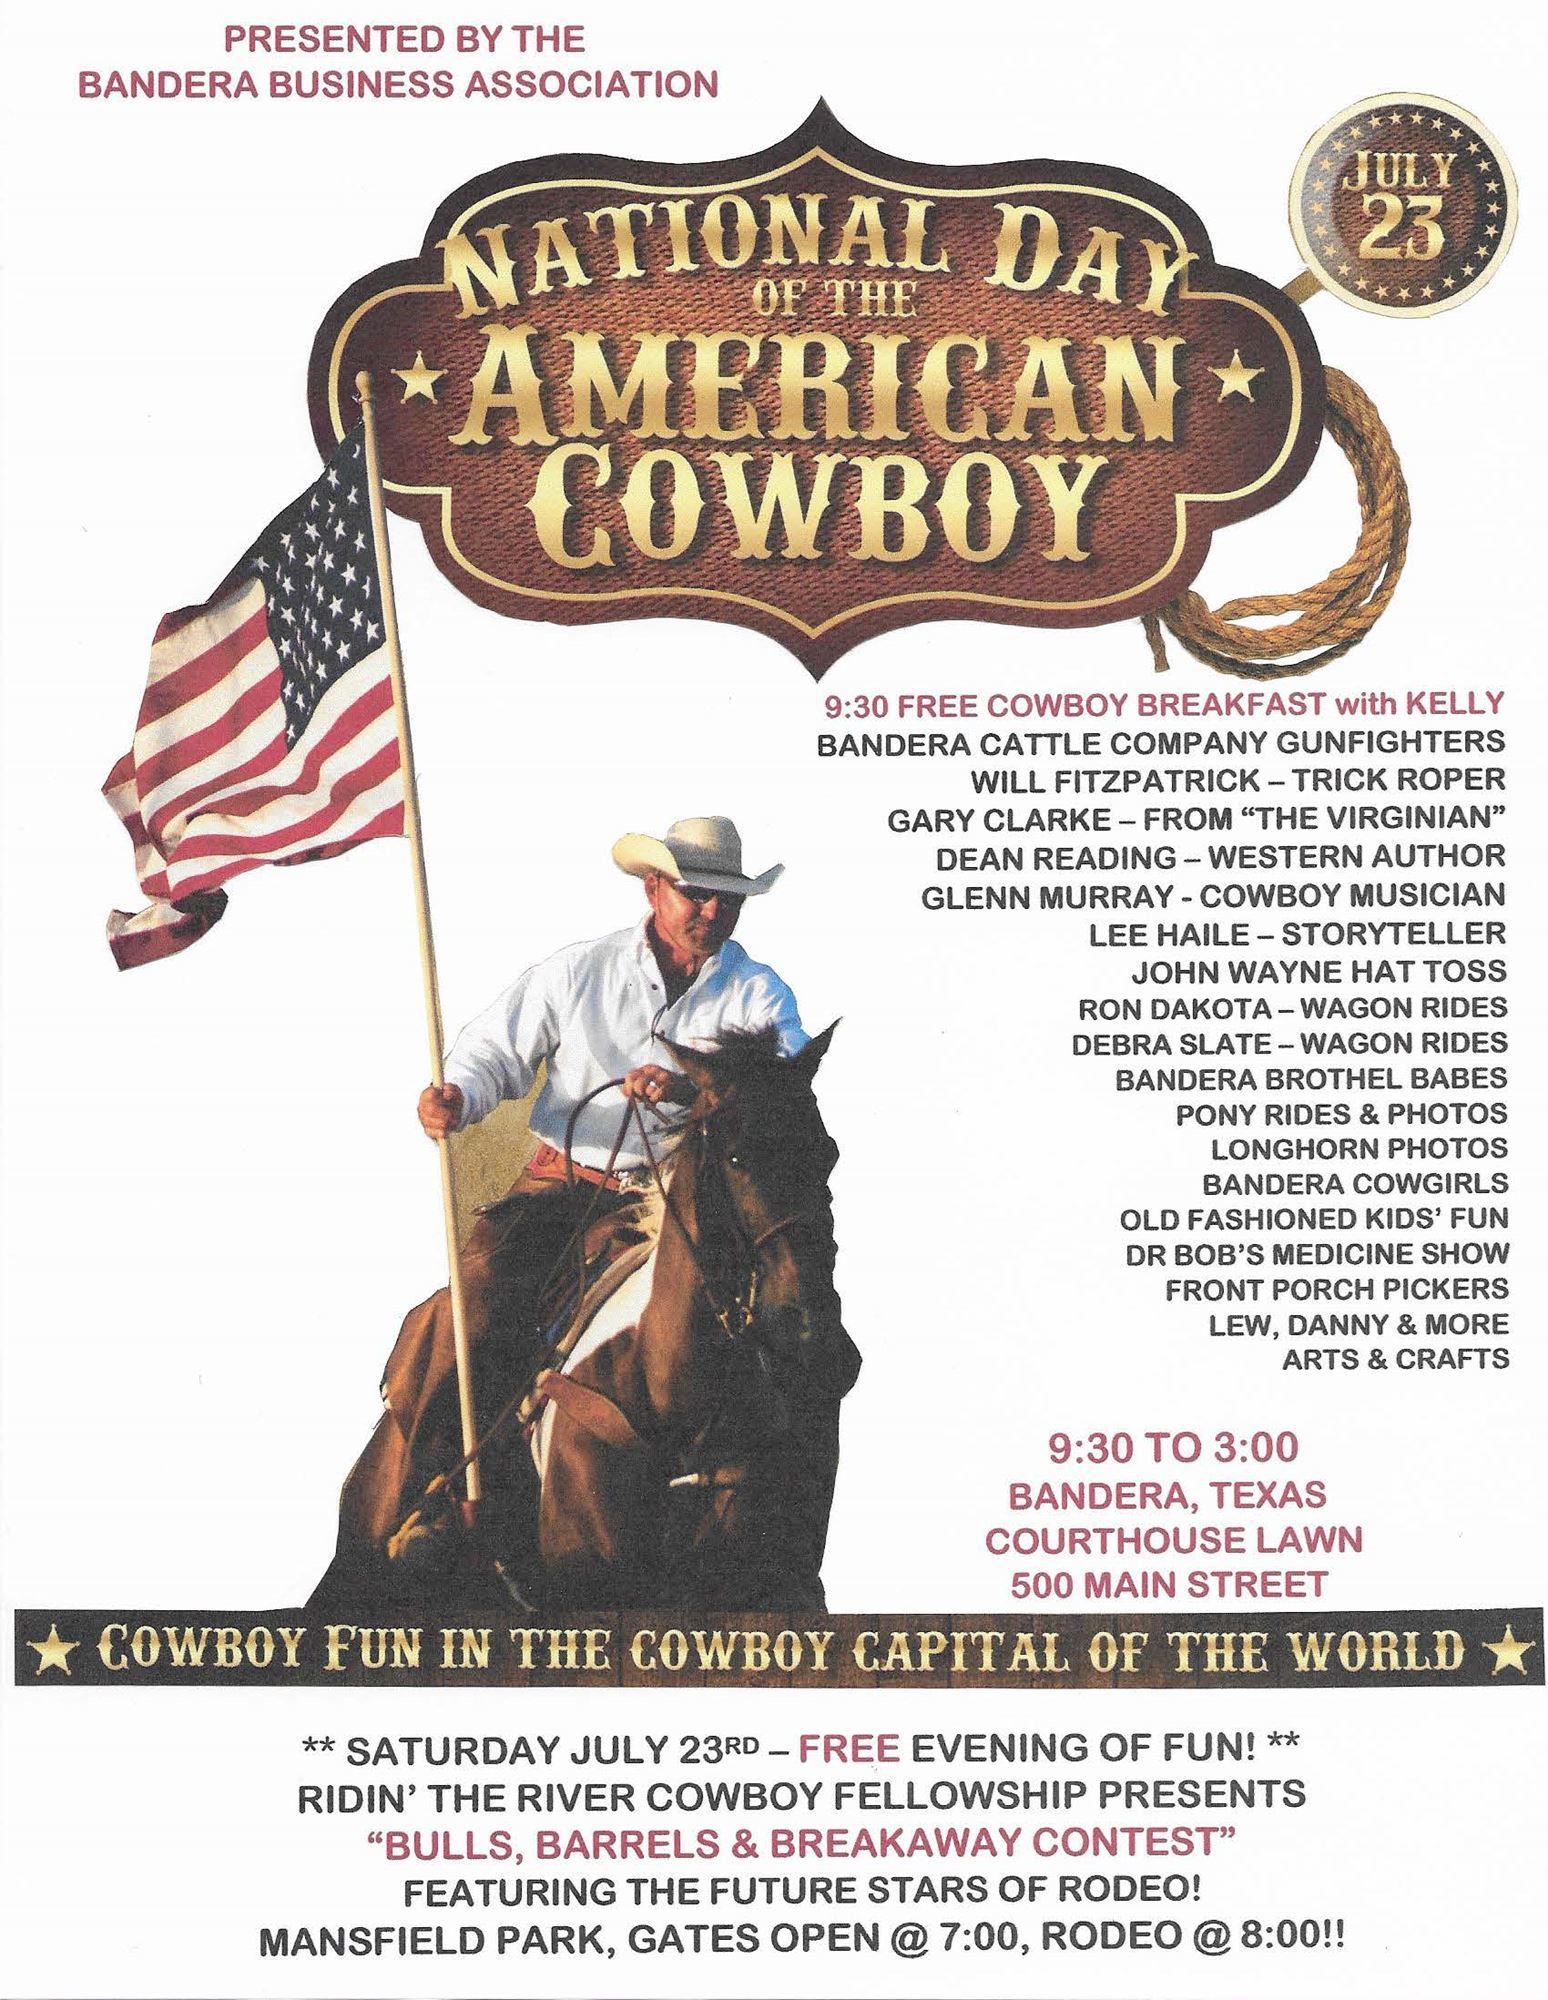 NATIONAL DAY OF THE AMERICAN COWBOY